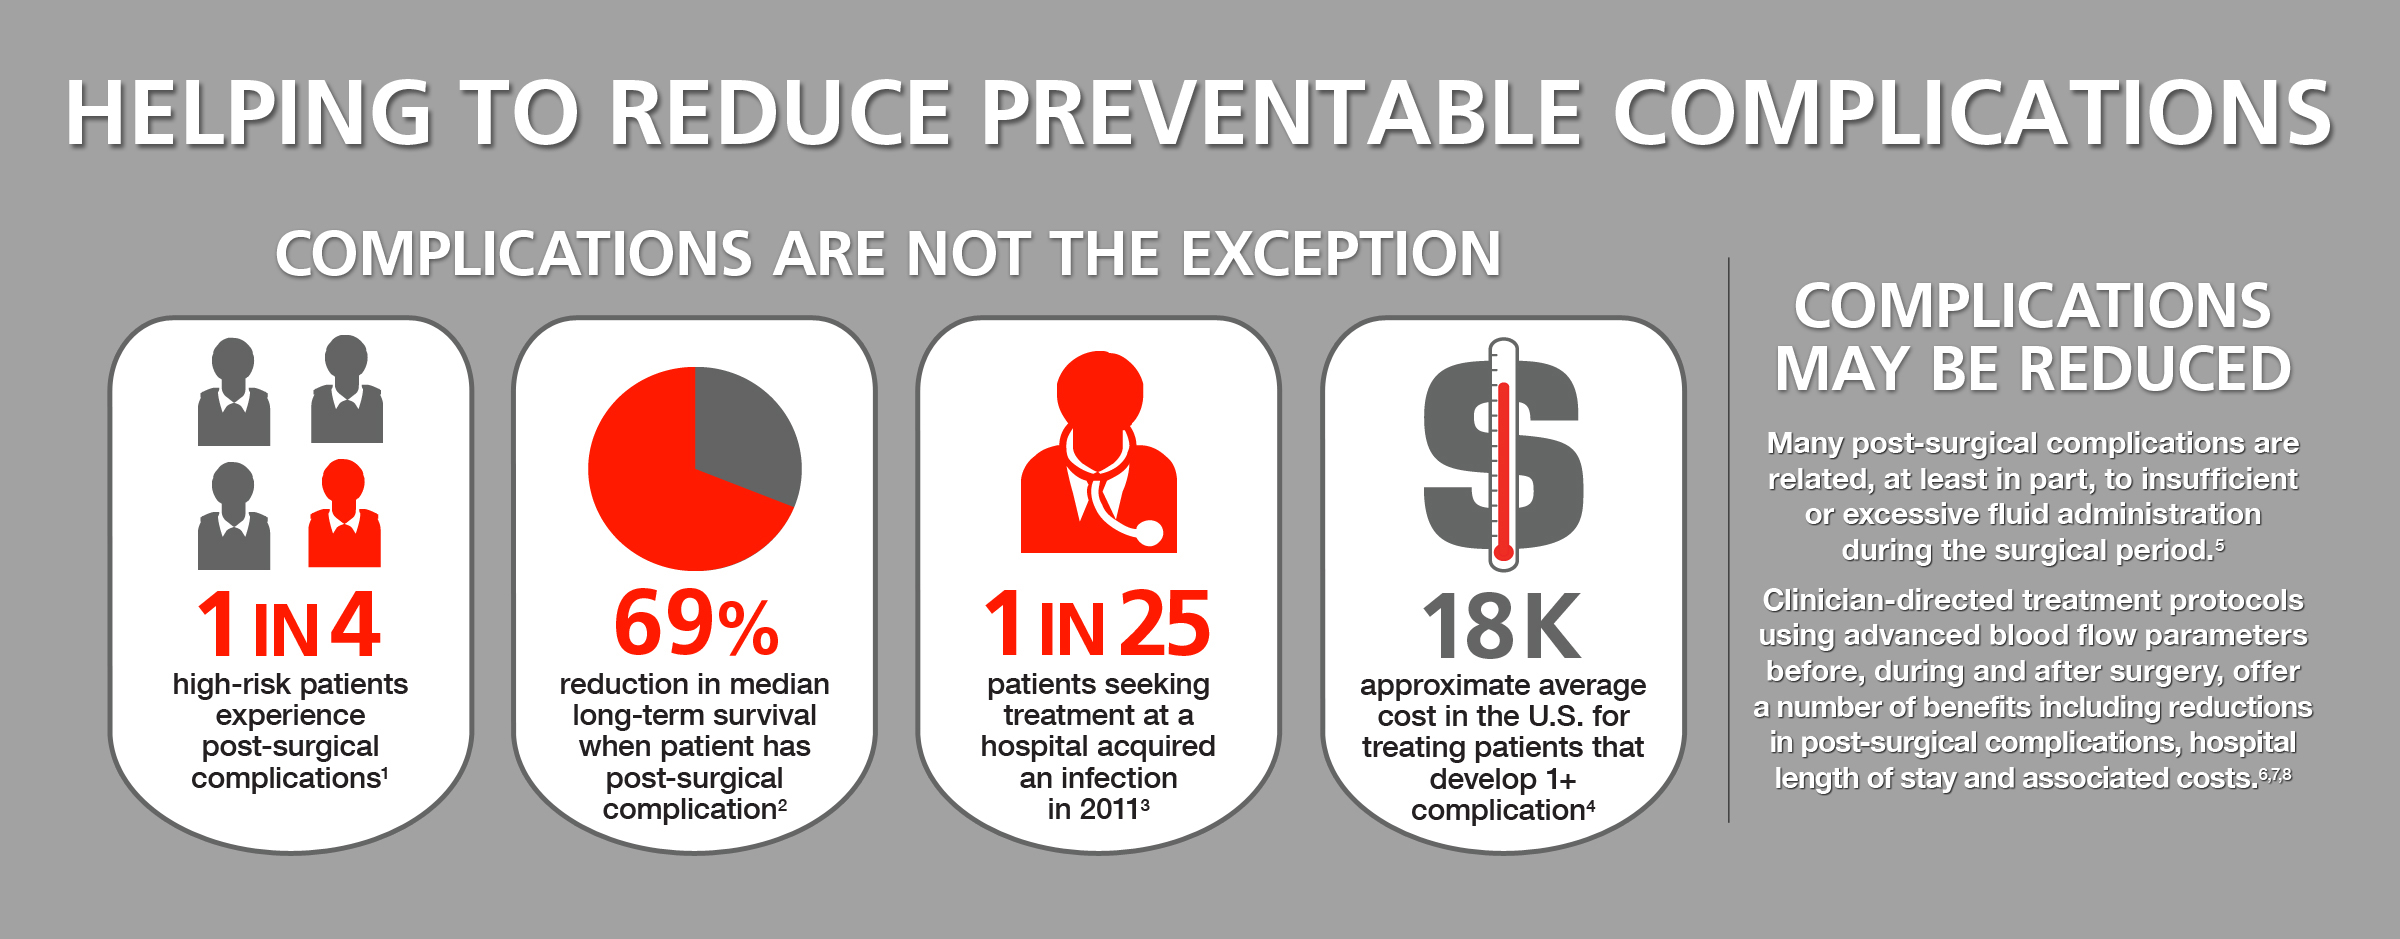 Complications are not the exception. In fact, 25% of high-risk patients experience post-surgical complications.